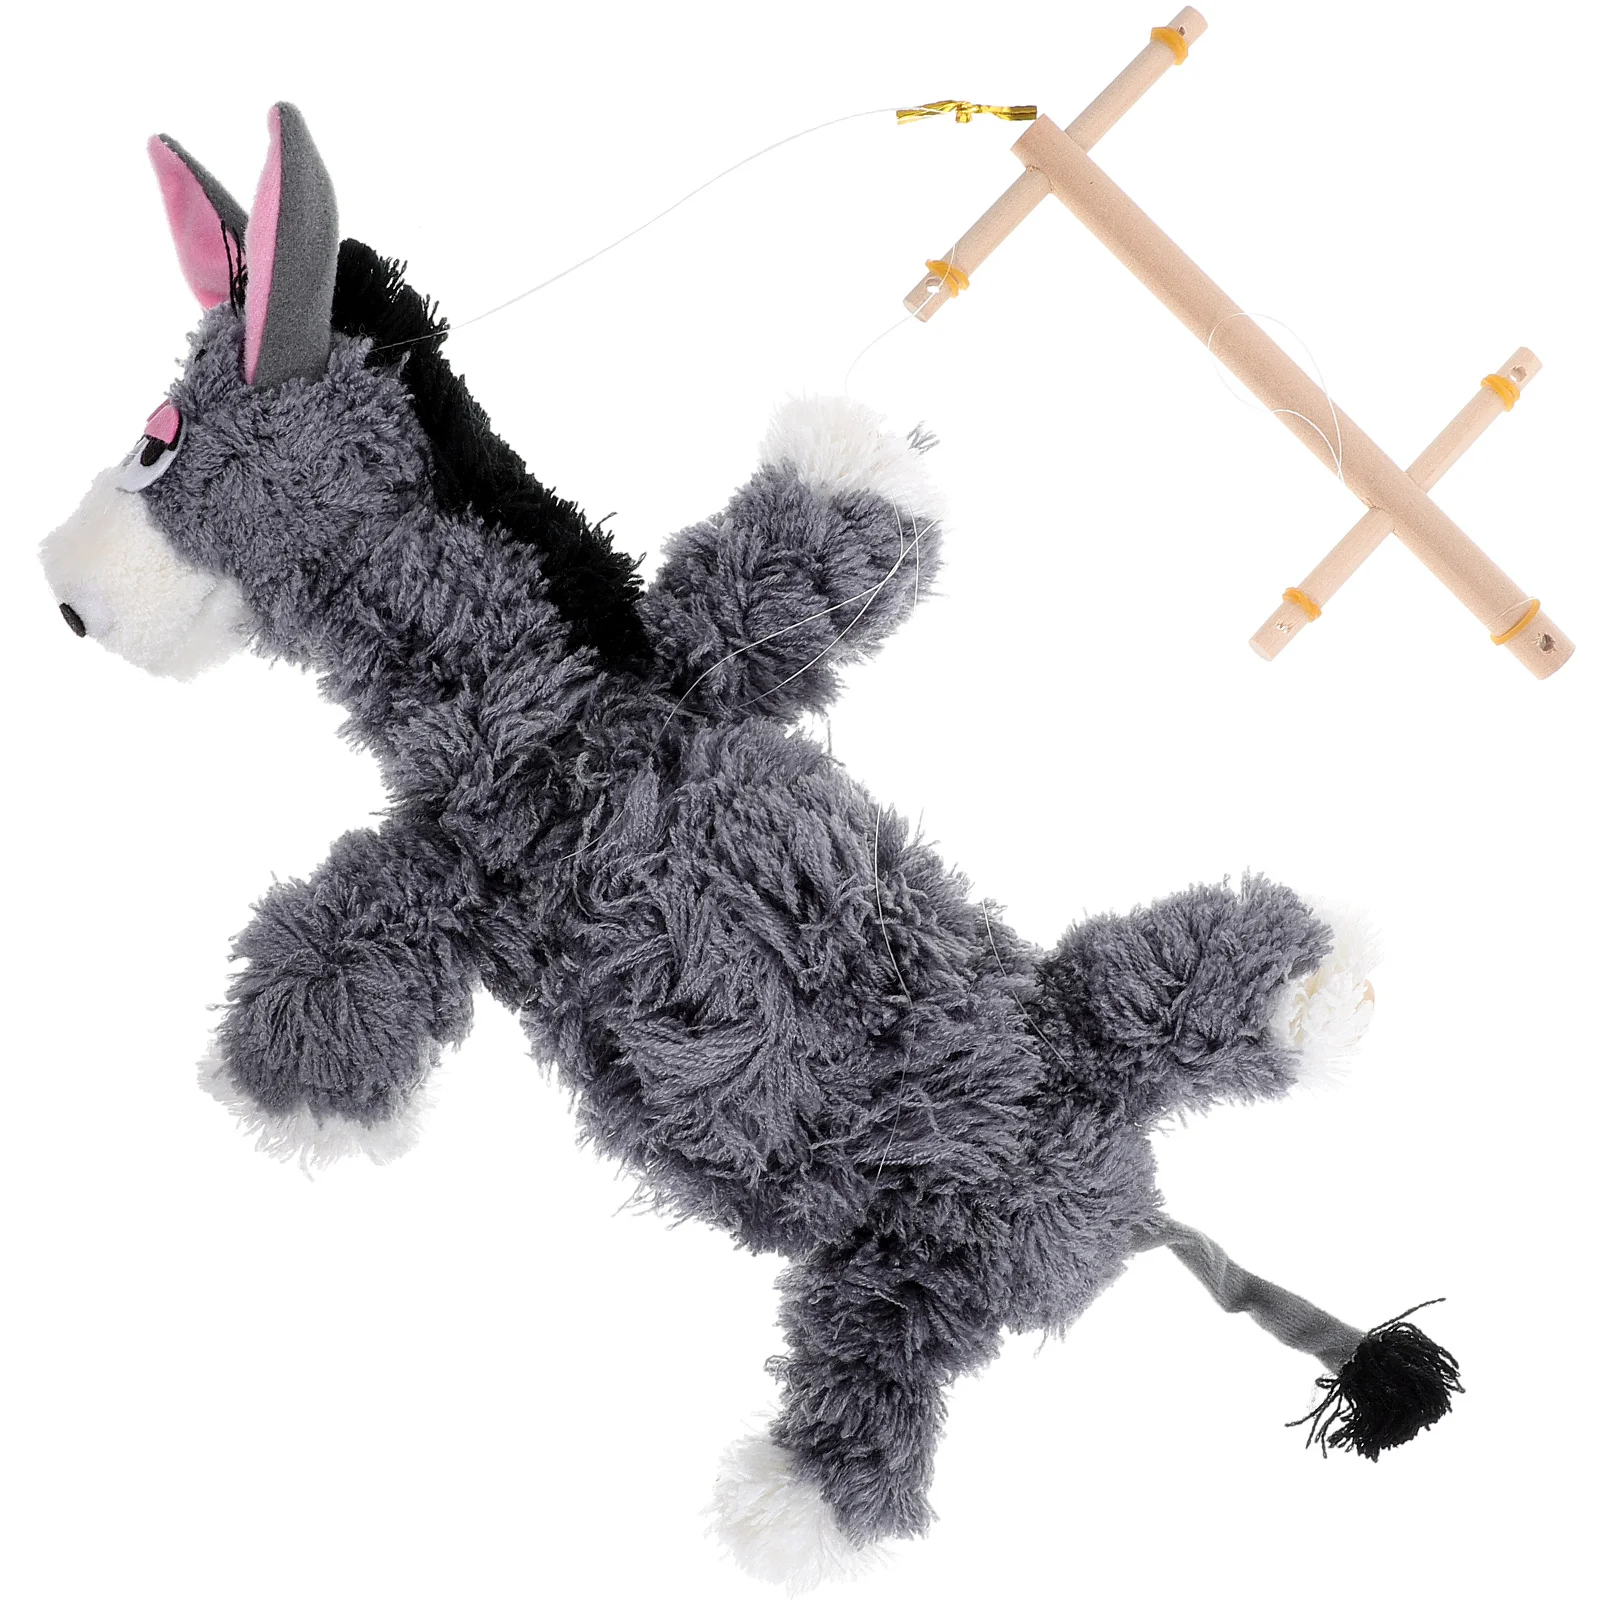 

Marionette Kids Playset Interesting Marionettes Girl Interactive Toys Plush Funny String Animal Puppet Child